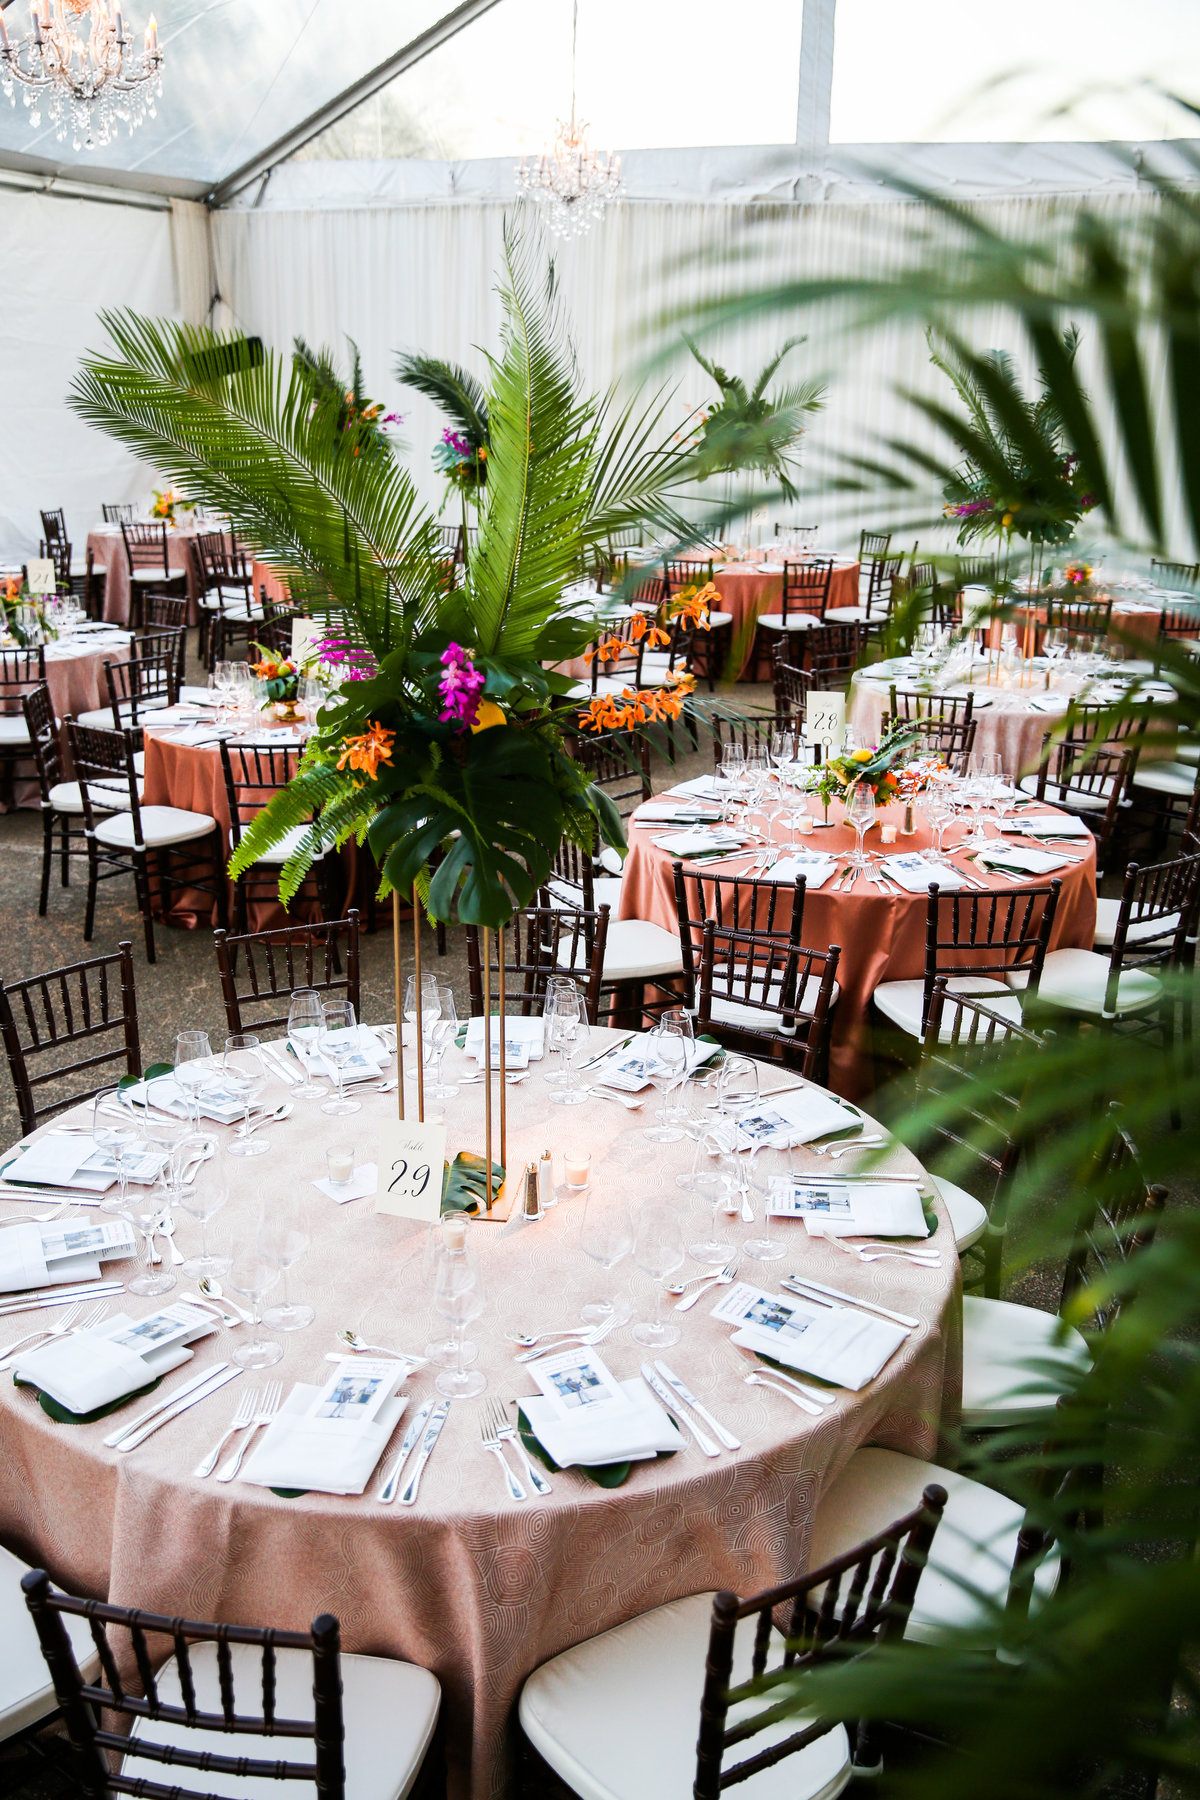 Conservancy Gala 2019 - Details  (41 of 237)